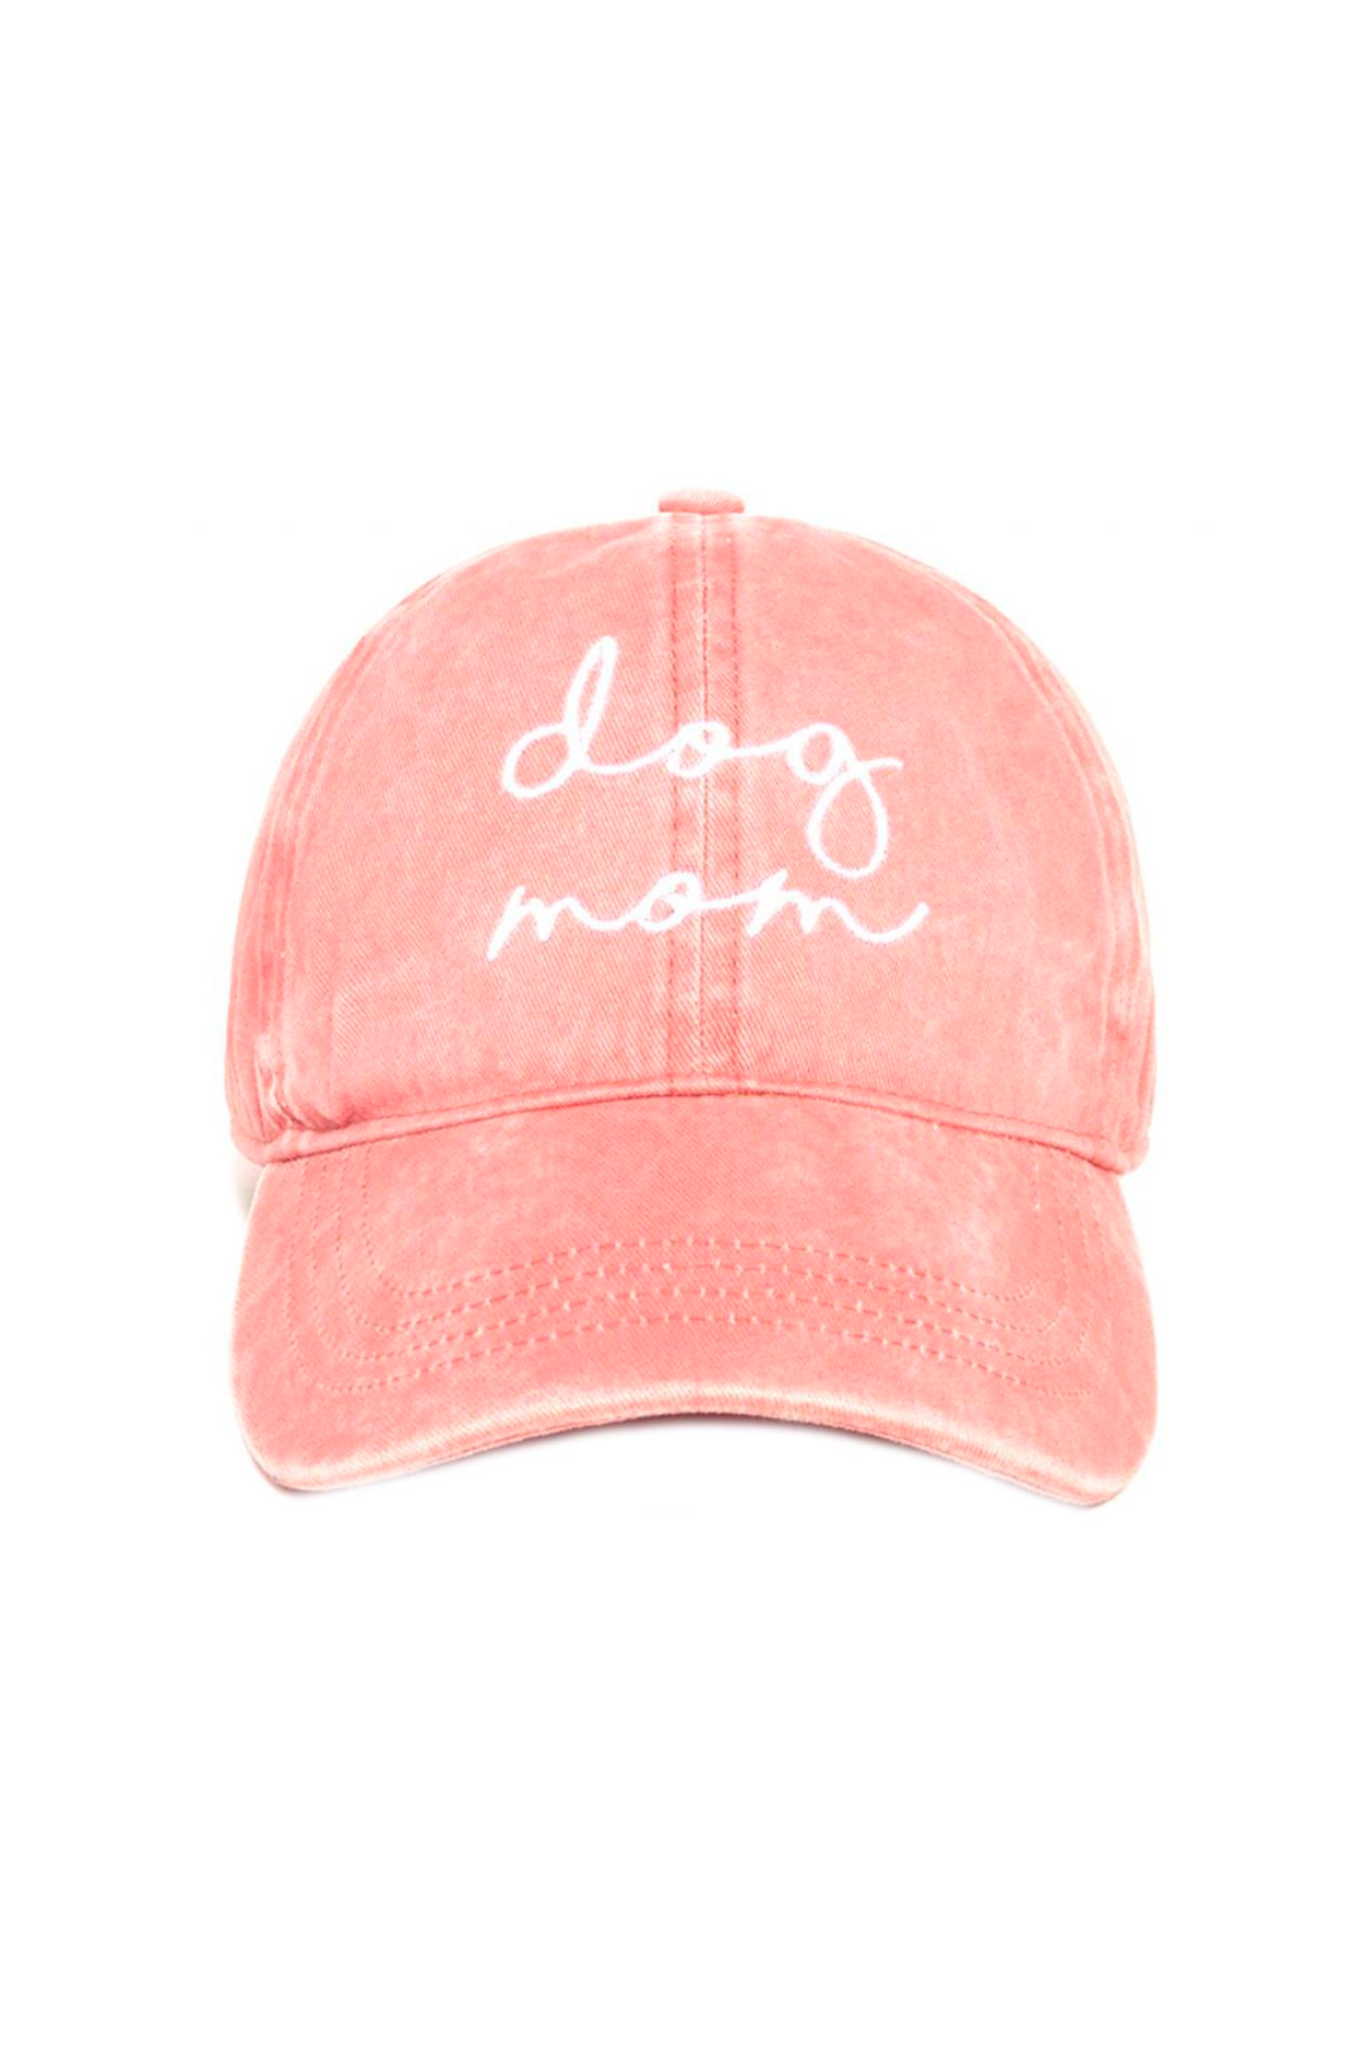 View 1 of Dog Mom Cap in Coral, a Hats from Larrea Cove. Detail: 
Introducing the Dog Mom Cap in Cor...